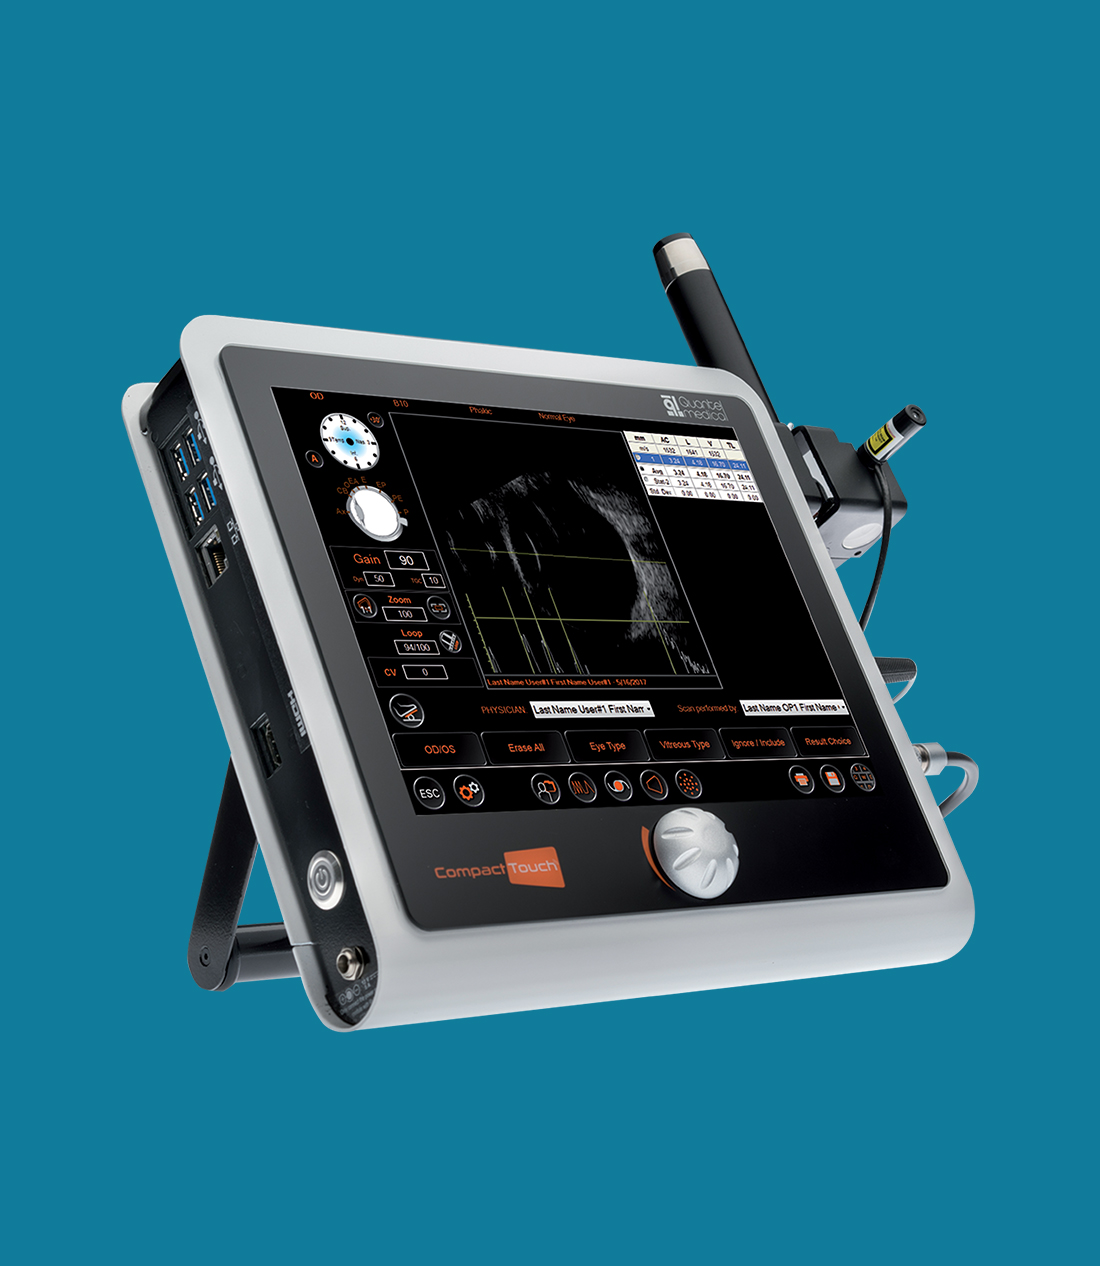 Compact Touch: 3 in 1 Ultrasound System A/B Scan & Pachymetry from Quantel Medical